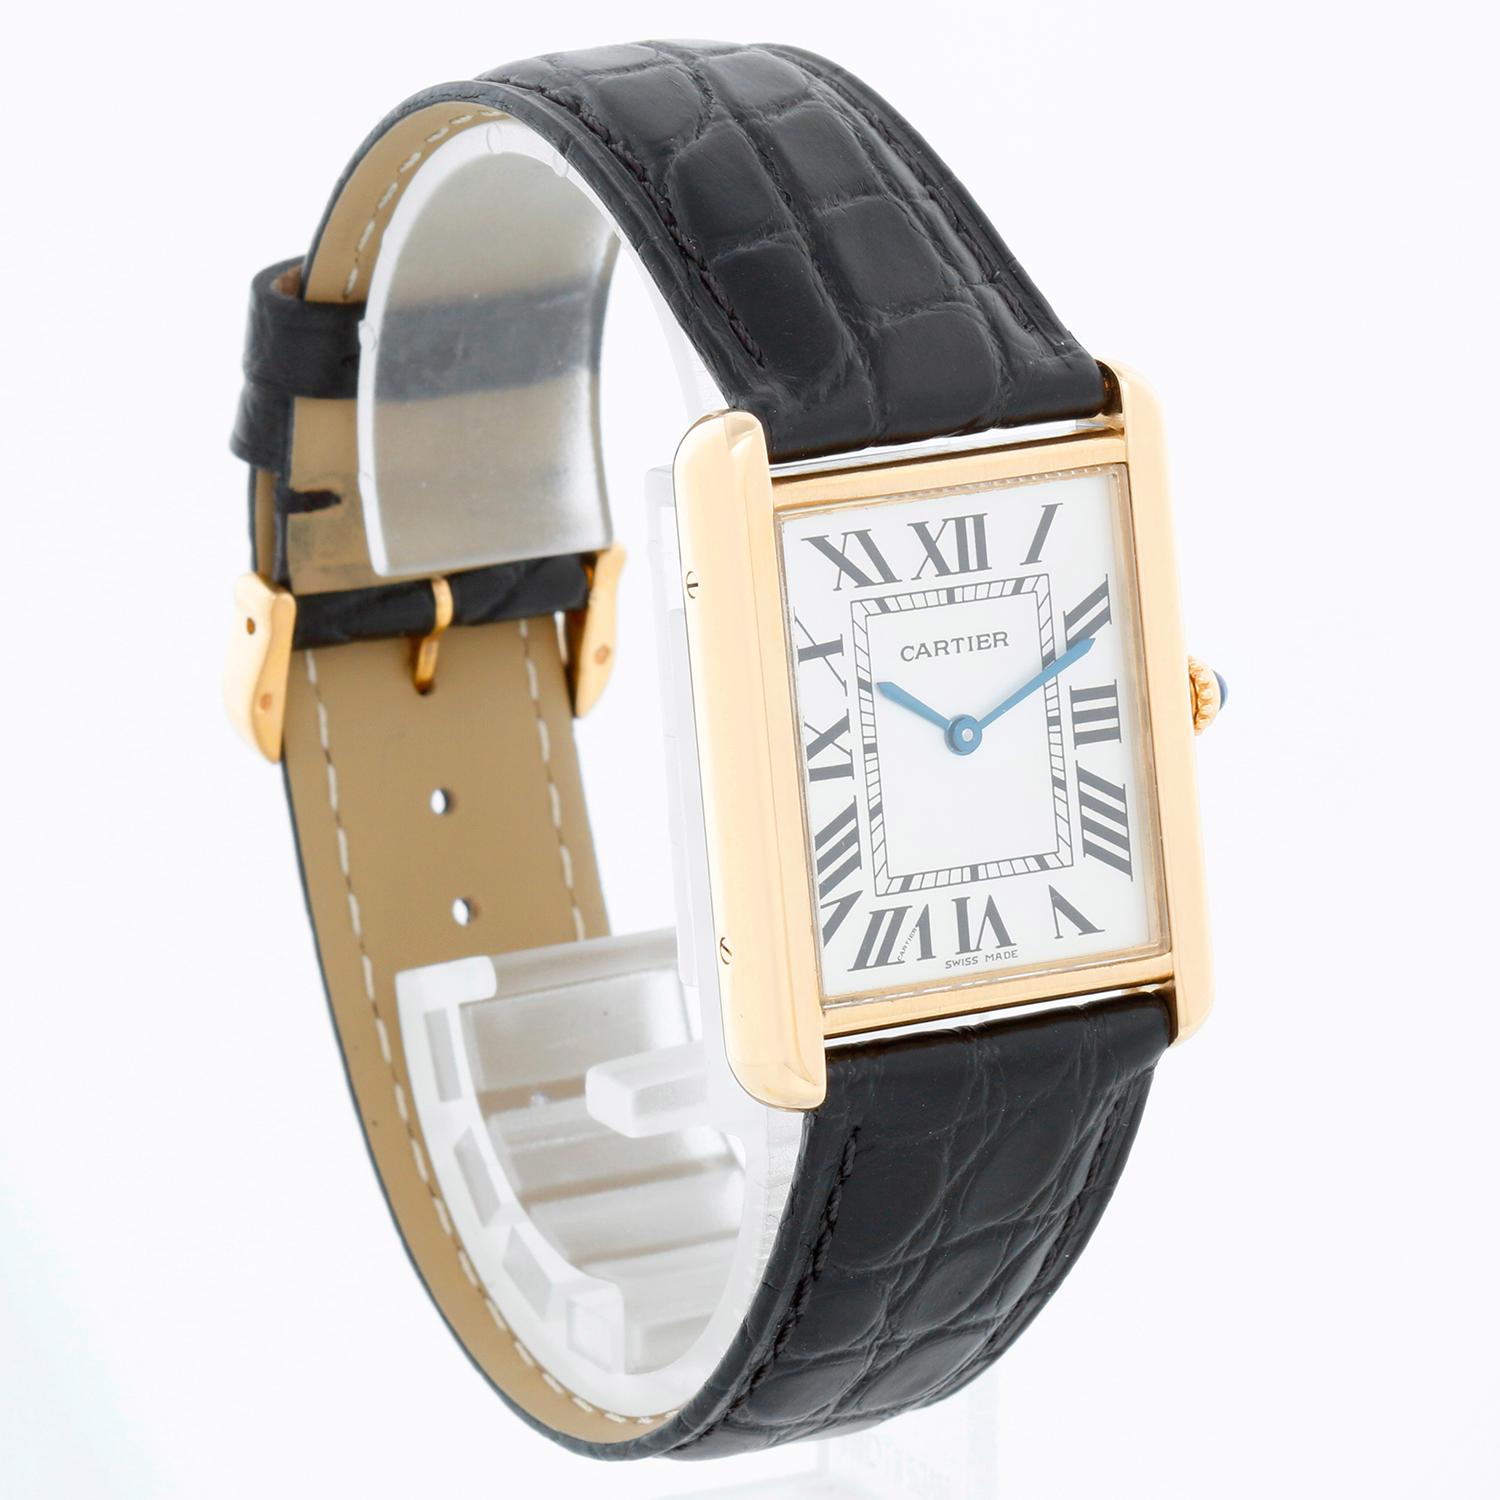 Cartier Tank Solo 18K Yellow Gold Men's Watch W1018855 2742 In Excellent Condition For Sale In Dallas, TX